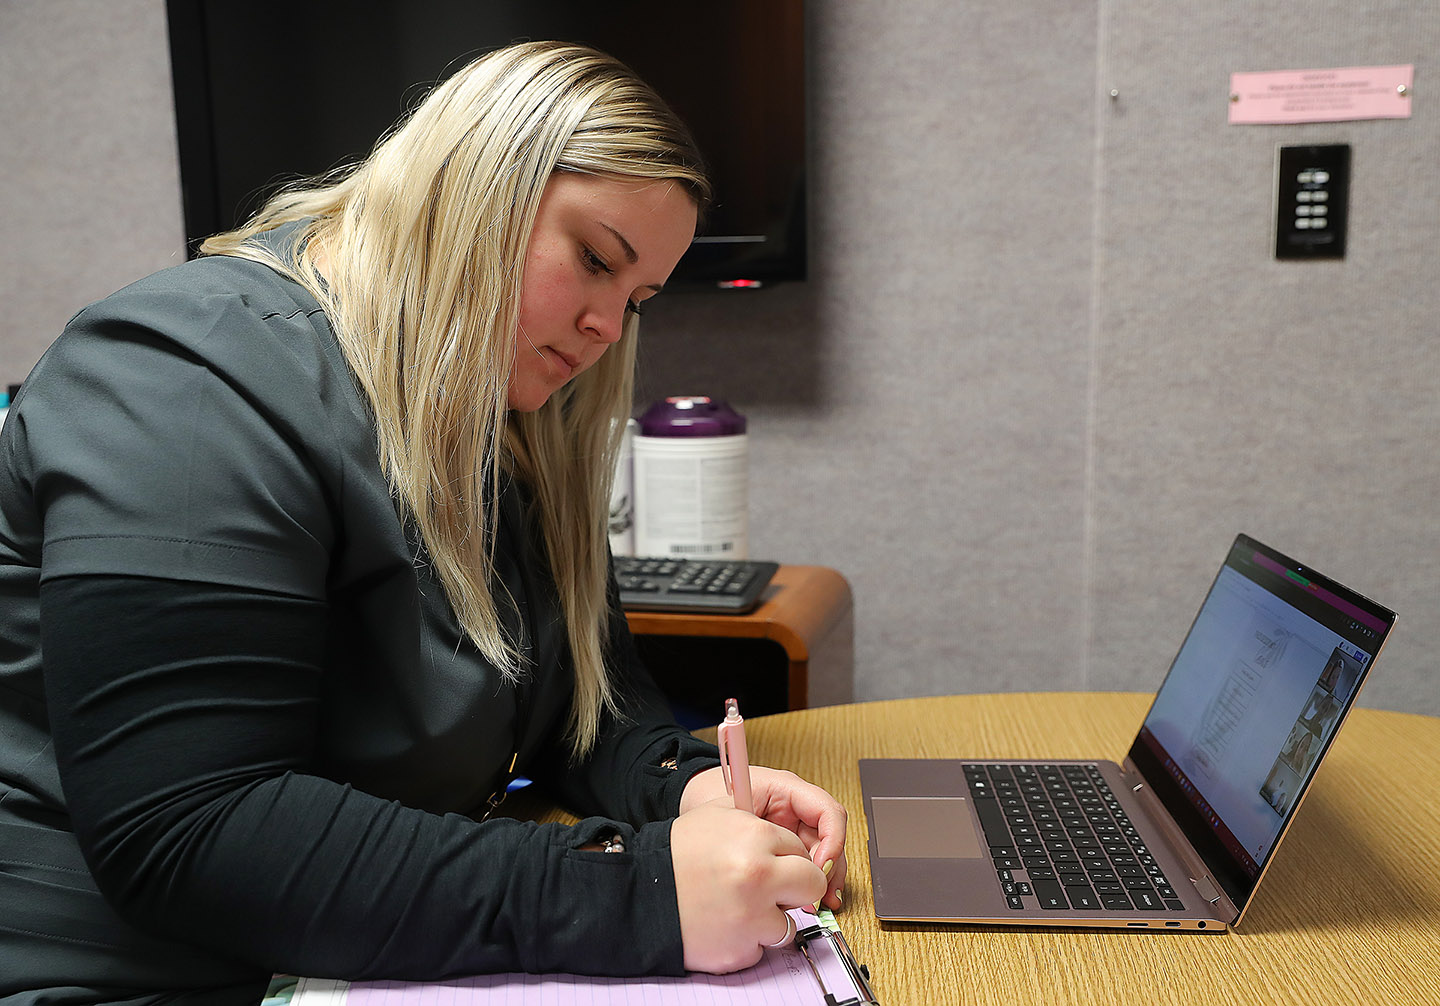 Melody Howard is one of seven UNK students participating in the Creating Connections outreach project, which uses telehealth technology to support stroke survivors. Howard is pursuing a master’s degree in speech-language pathology.